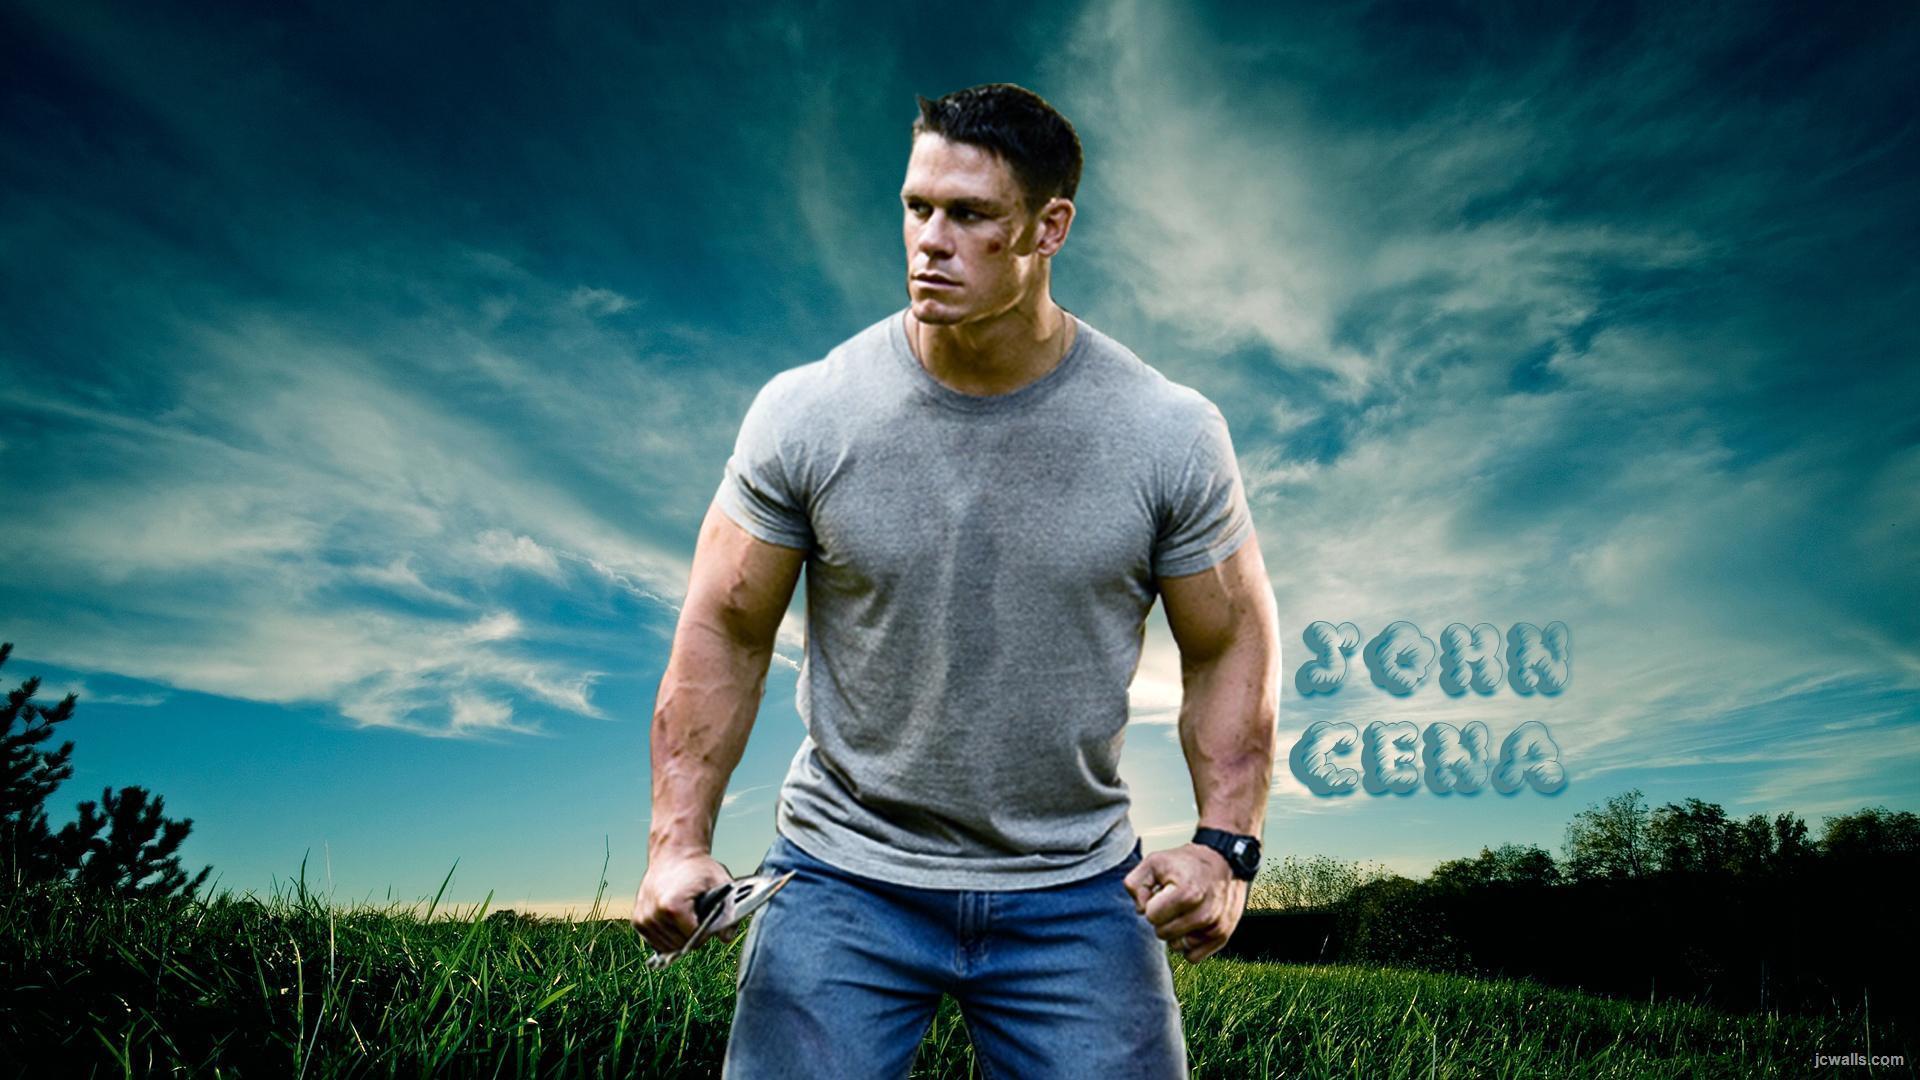 John Cena HD Wallpapers And Image 2015 Free Download